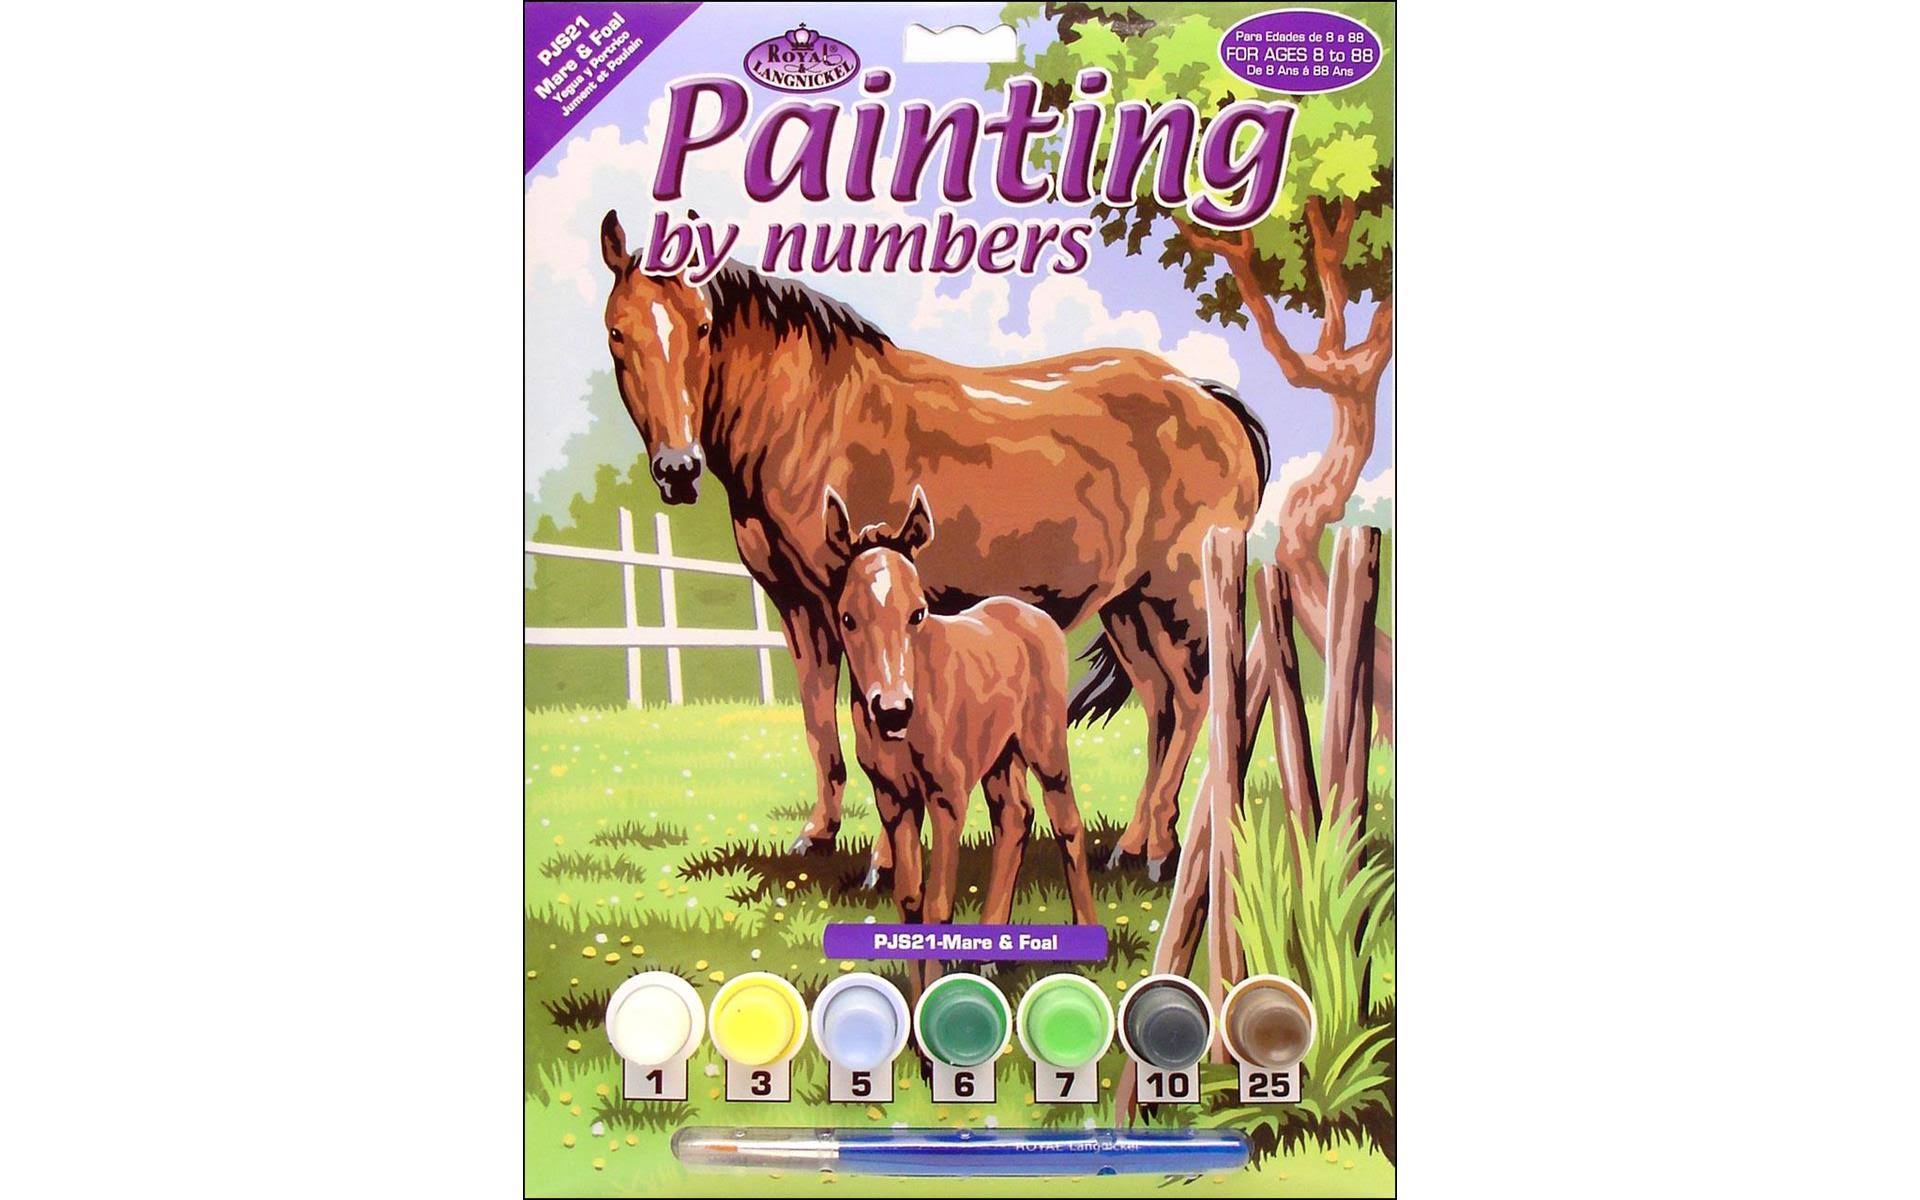 Royal & Langnickel Painting by Numbers Junior Small Art Activity Kit